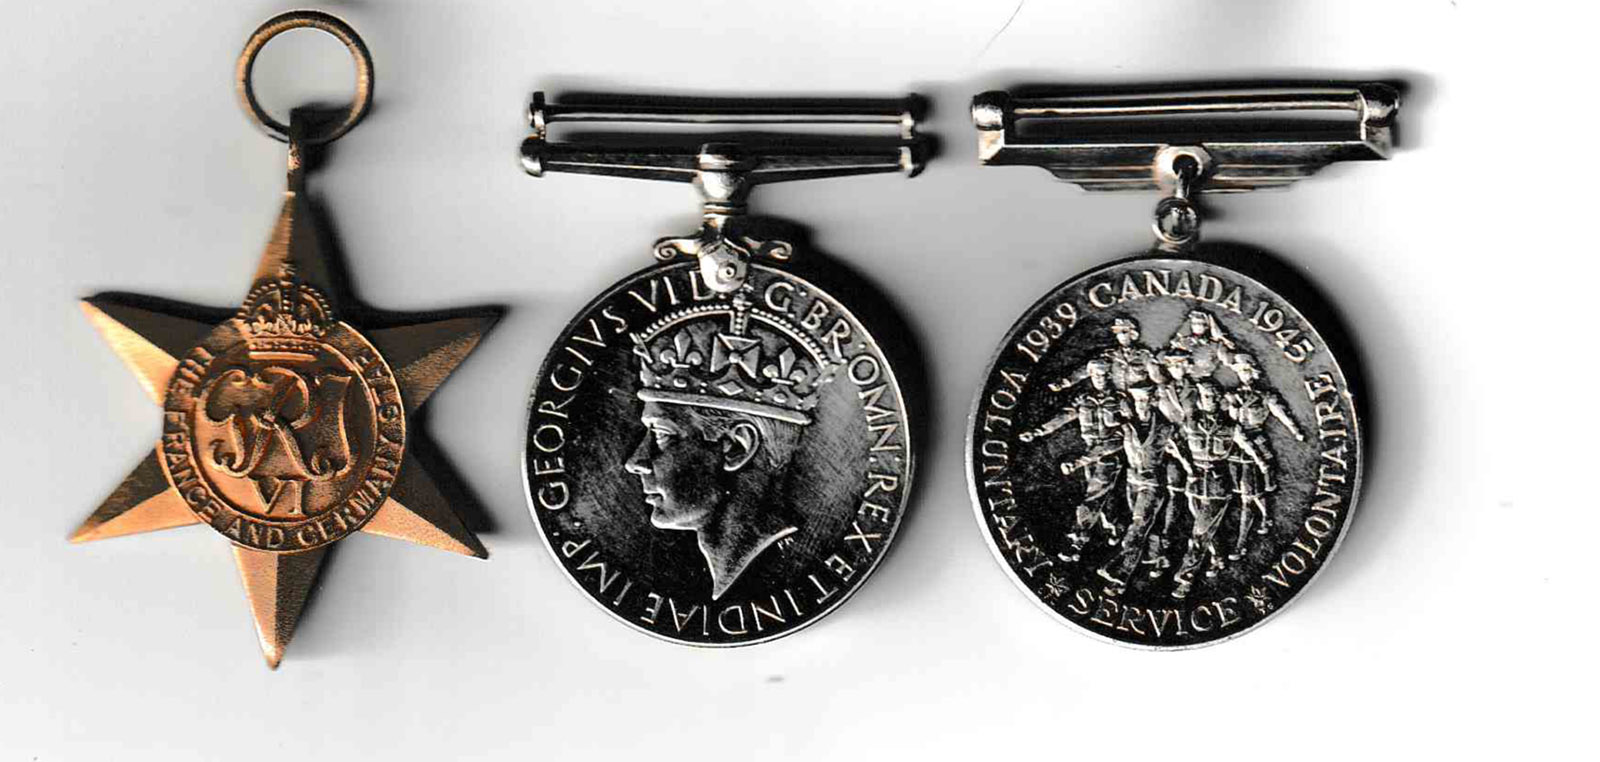 Medals earned by AB Harrison over the course of his service. From left to right they are the France and Germany Star, the War Medal and the Canadian Volunteer Service Medal.